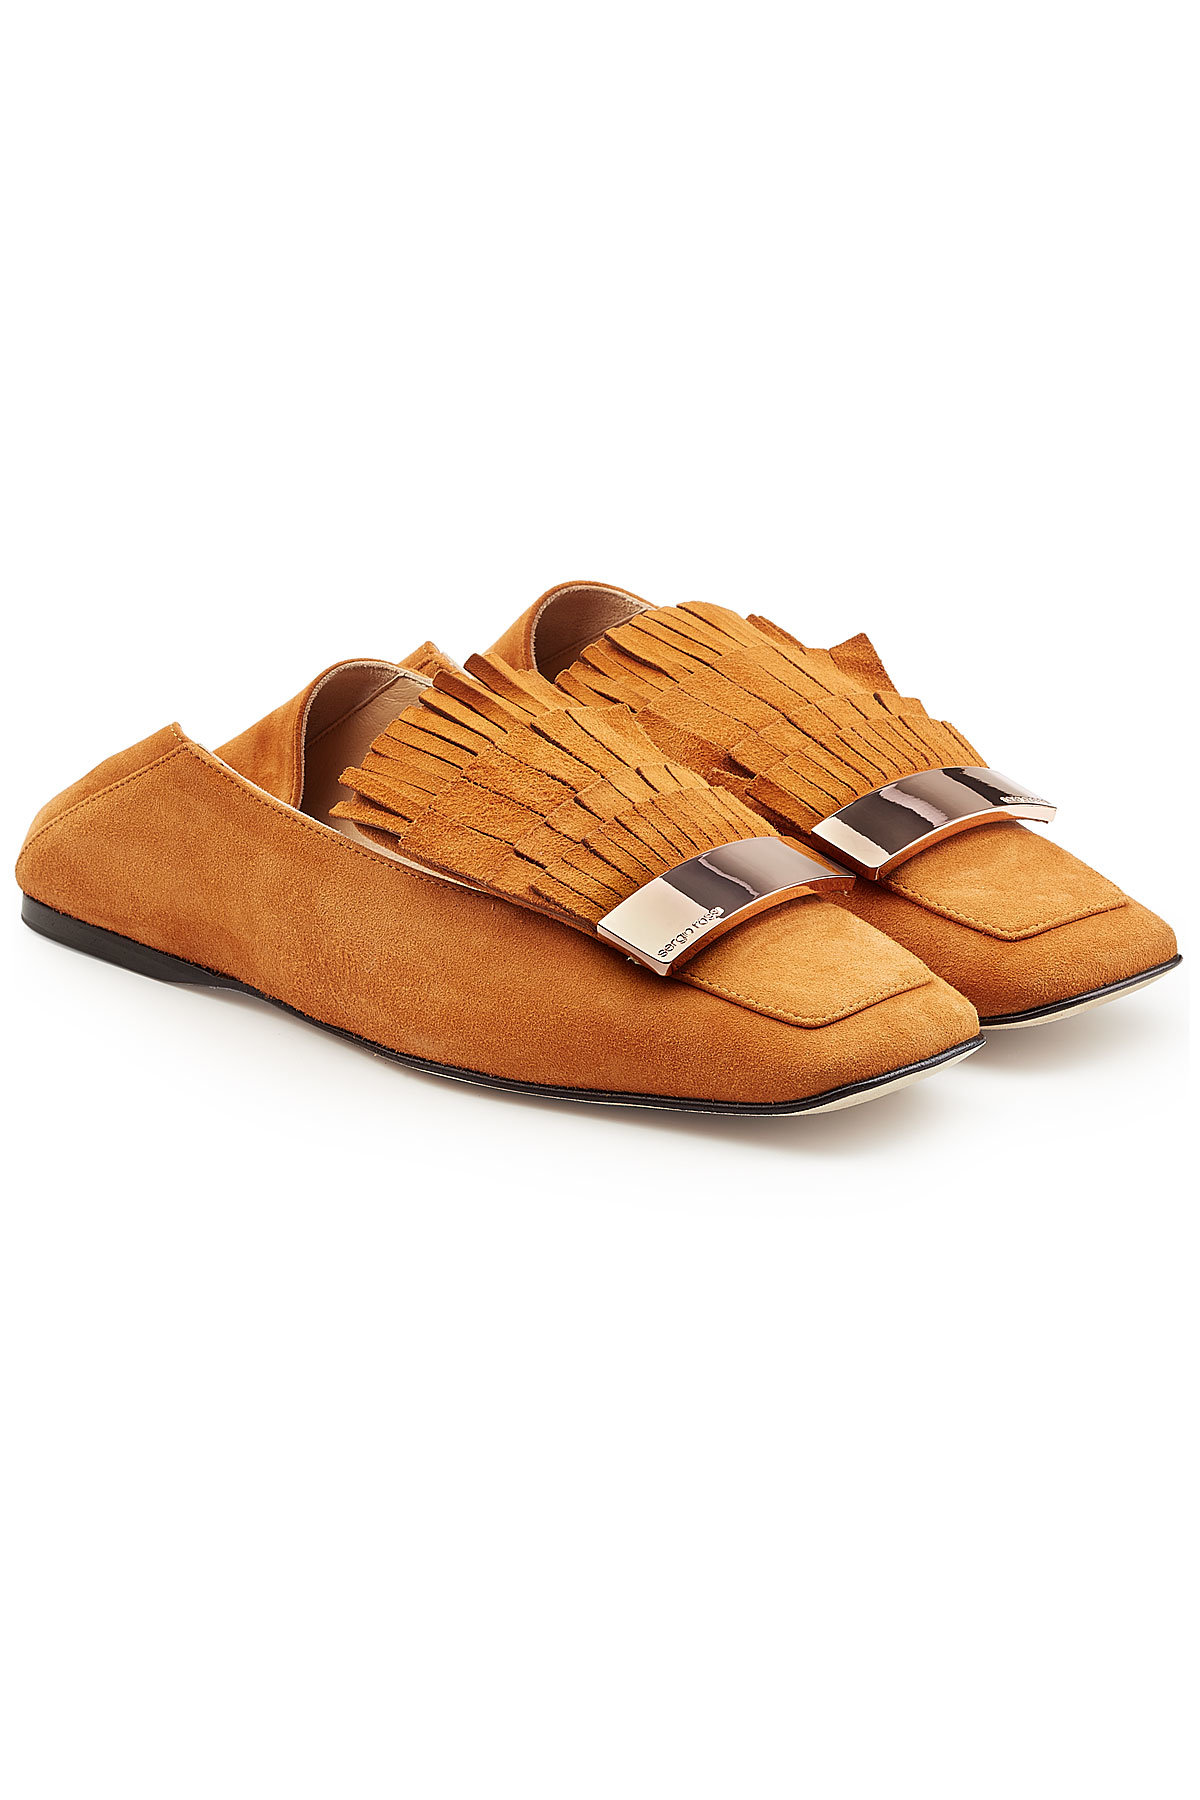 Sergio Rossi - Fringed Suede Loafers